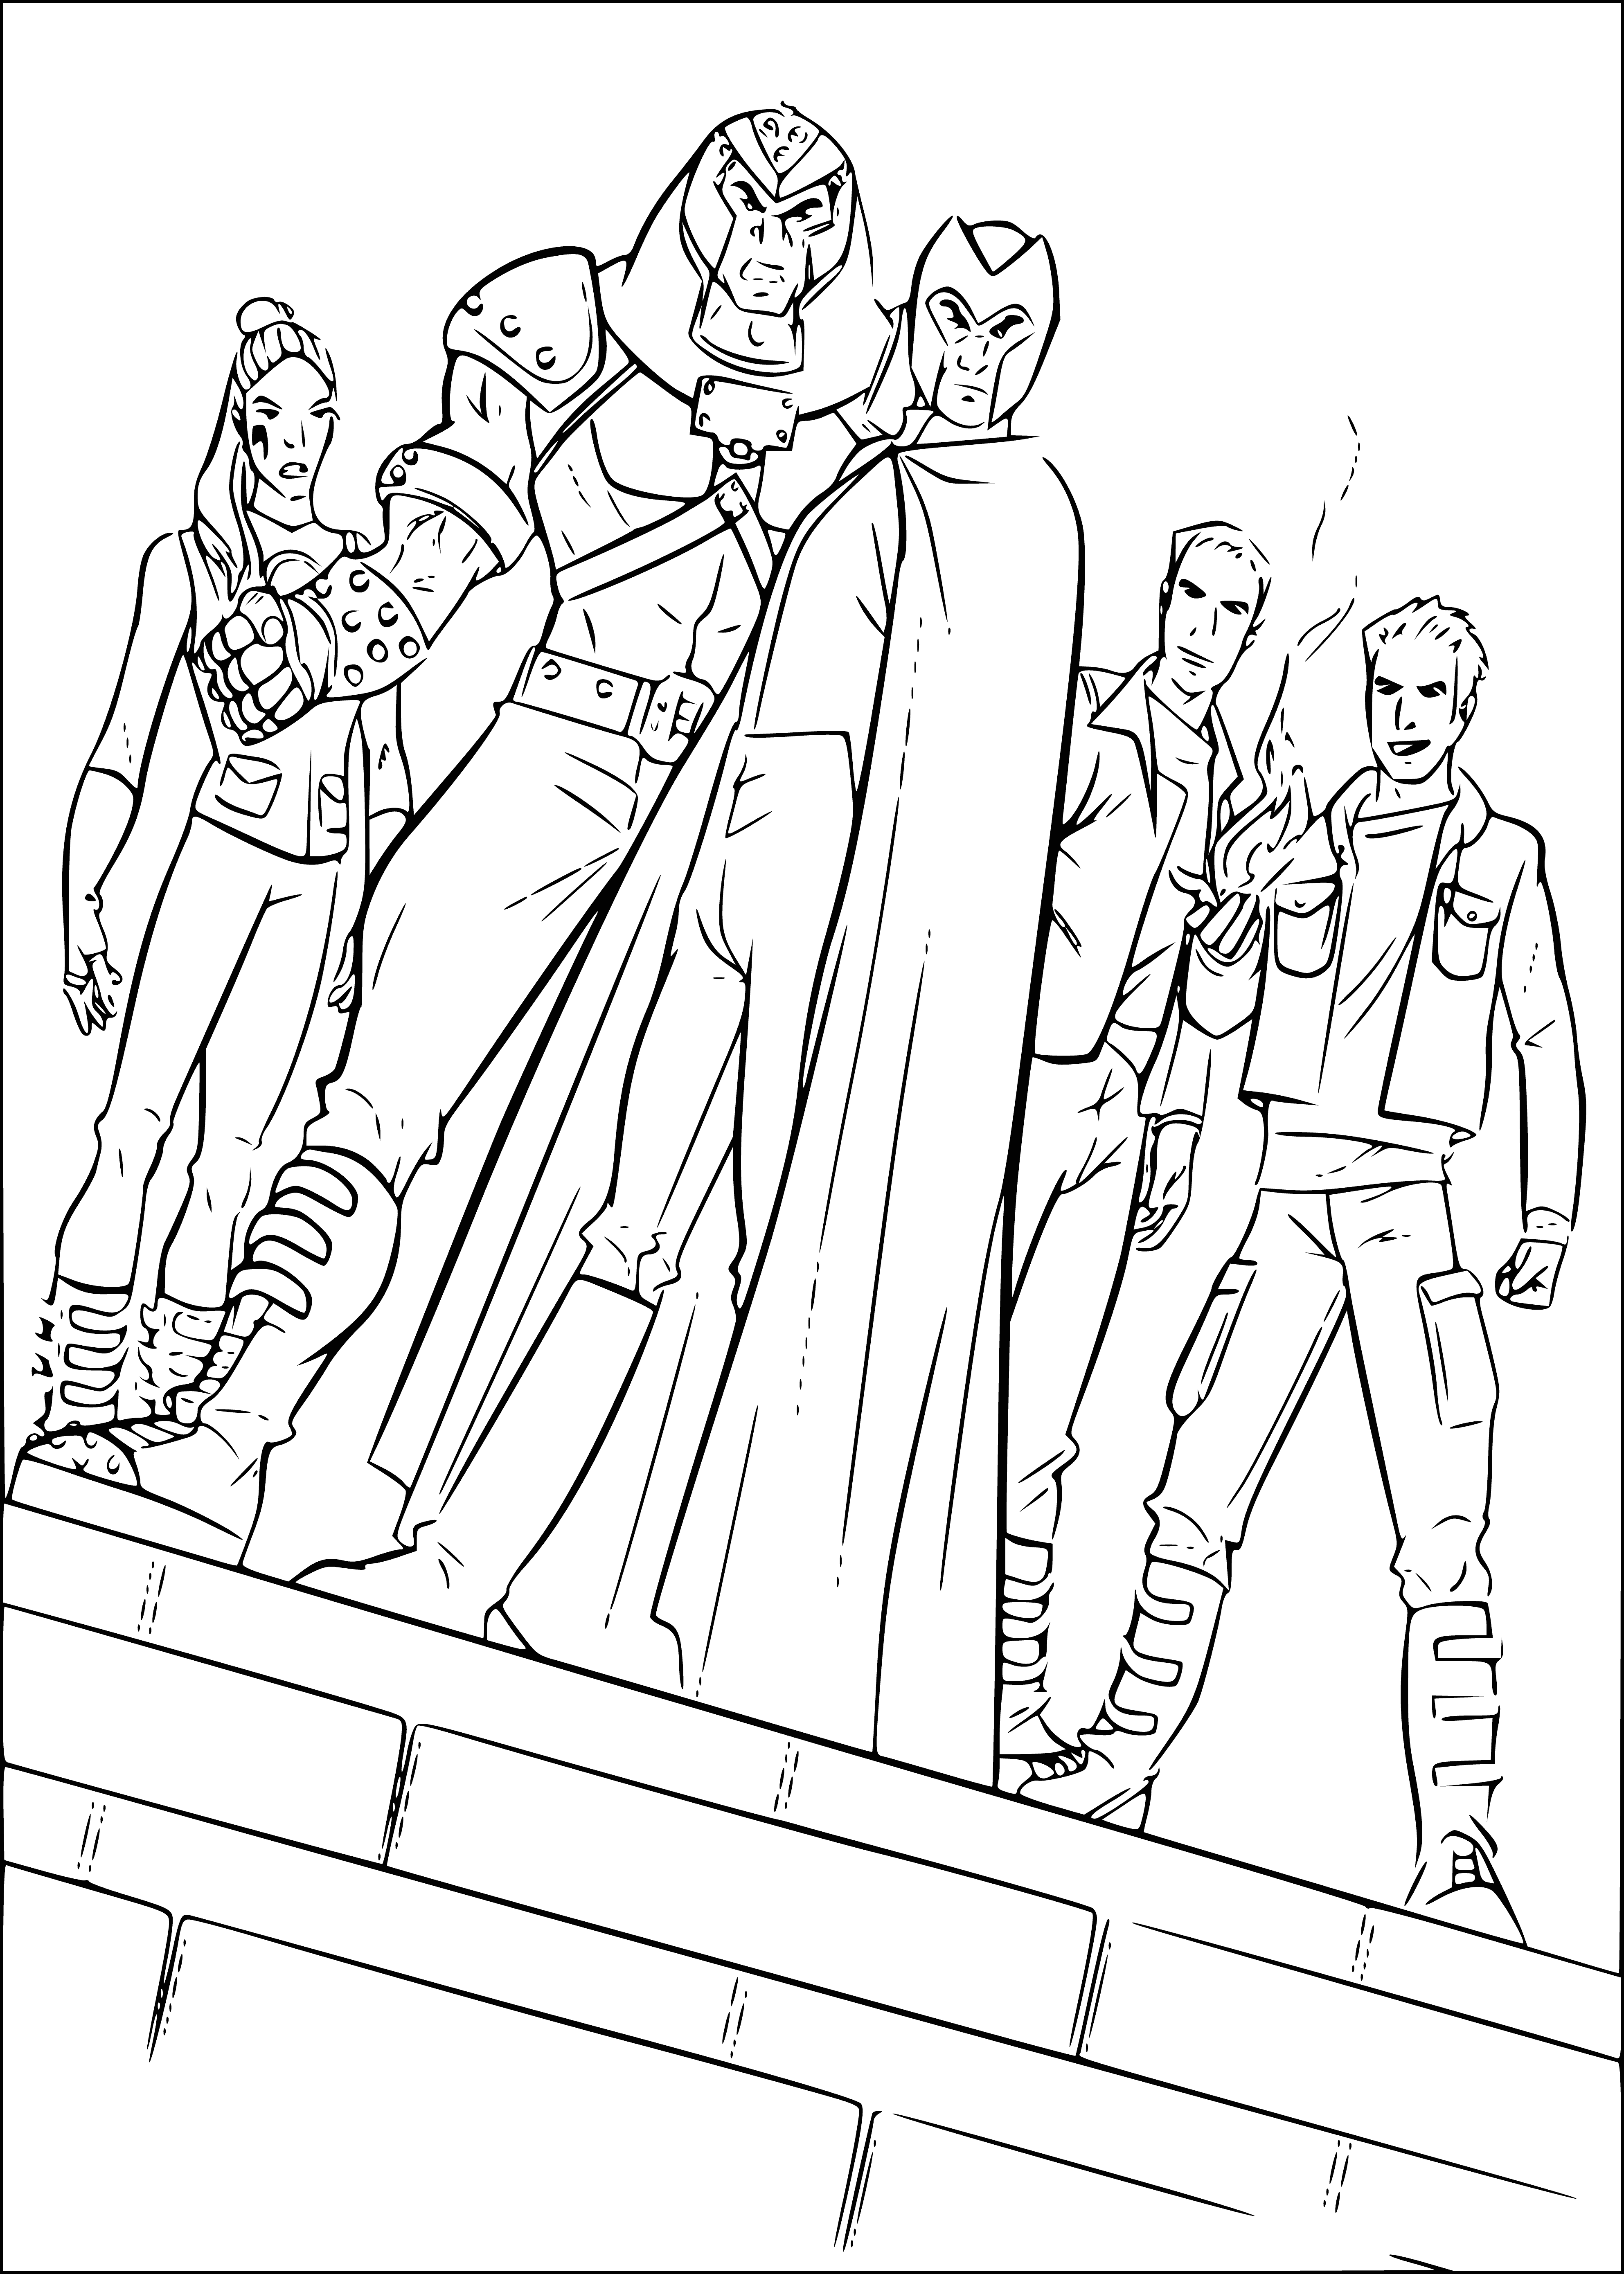 Magneto and the Bullet Man coloring page